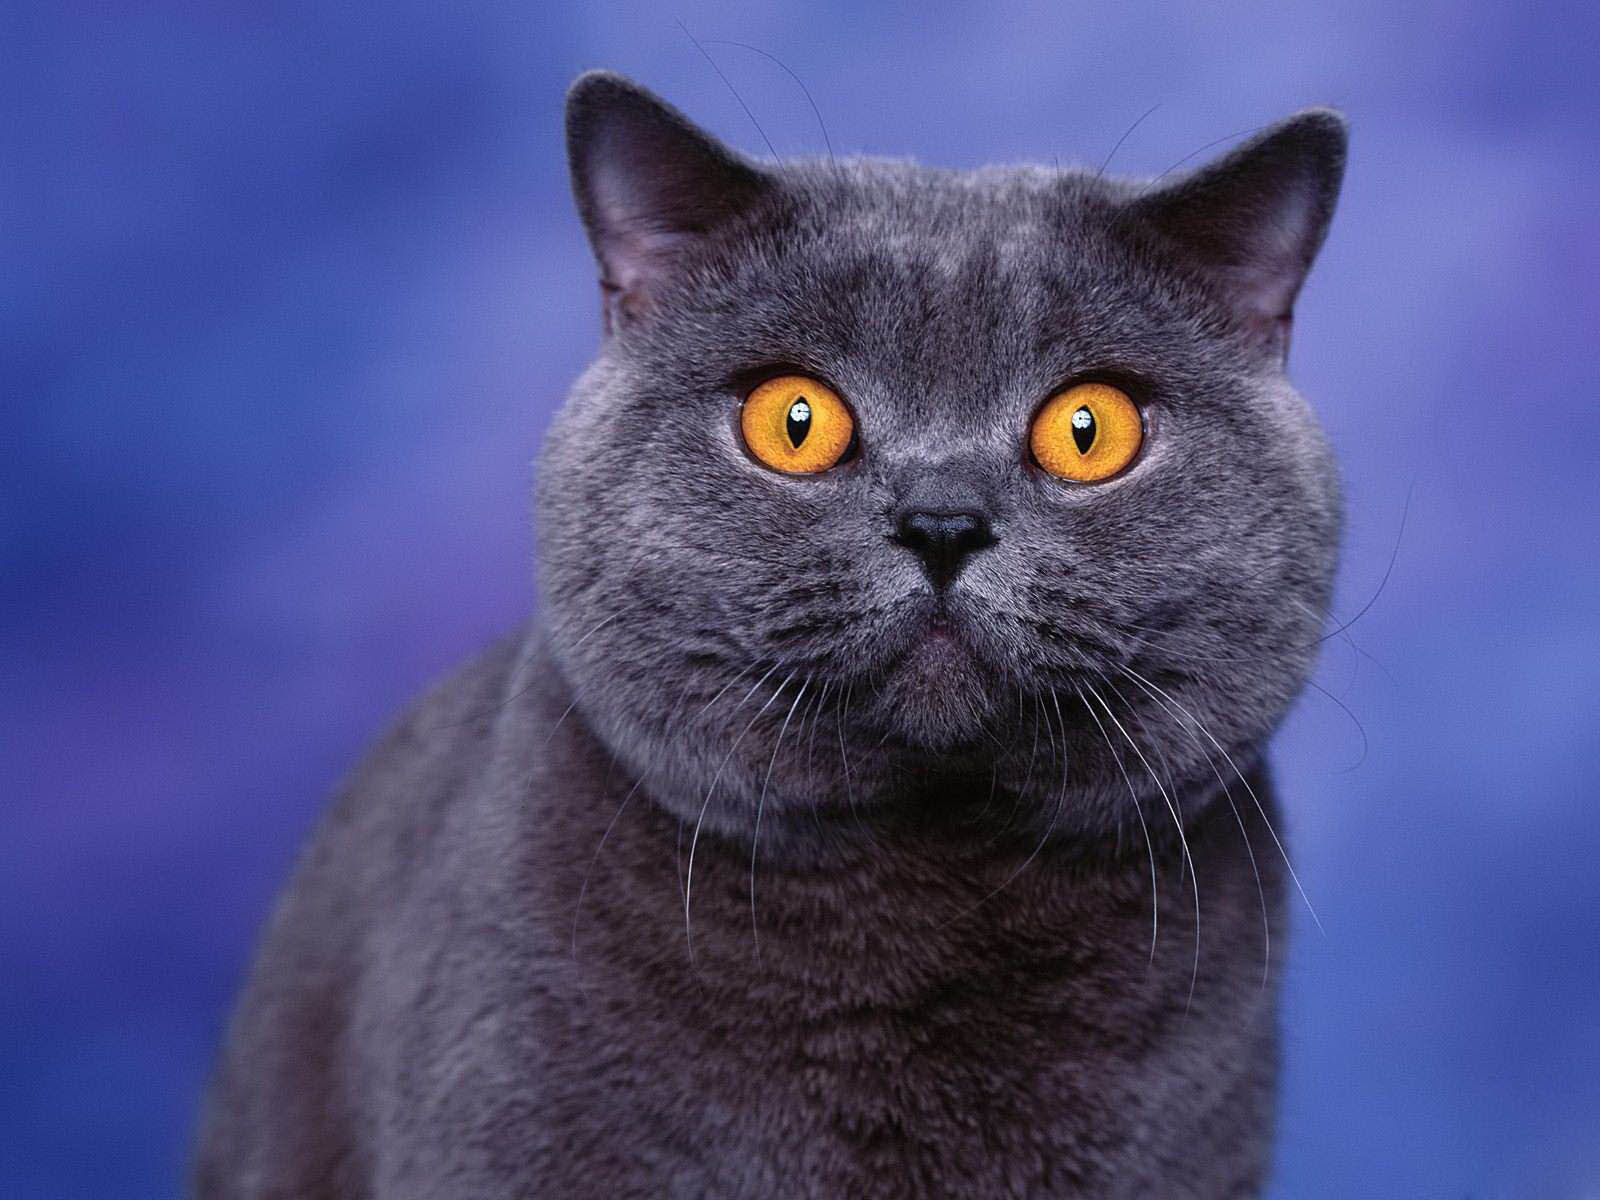  wallpapers  Yellow  Eyes cat  Wallpapers 